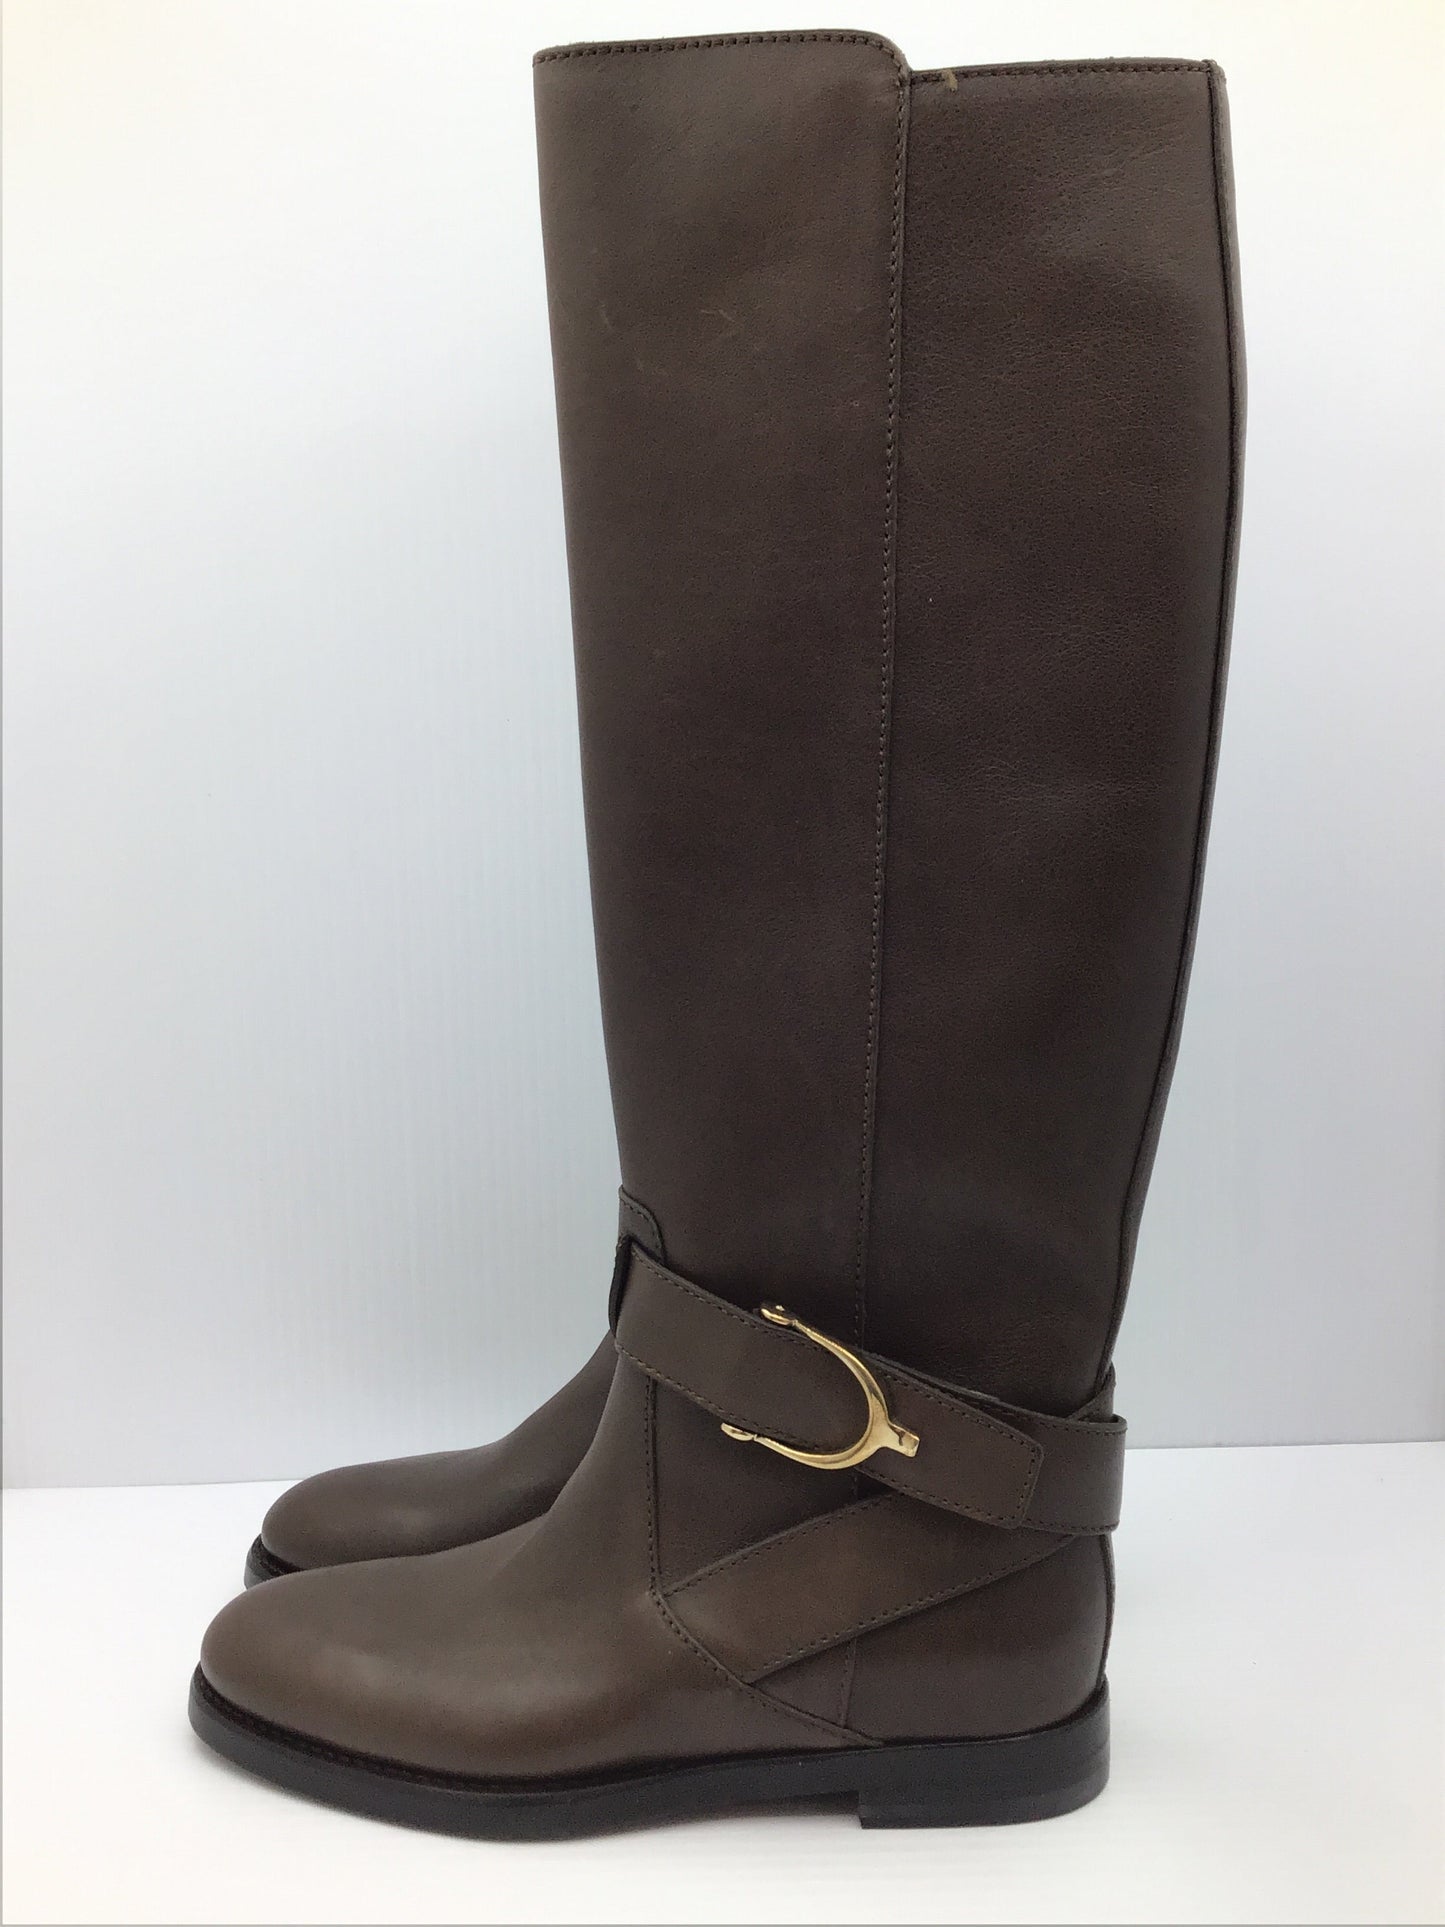 Boots Luxury Designer By Gucci  Size: 6.5